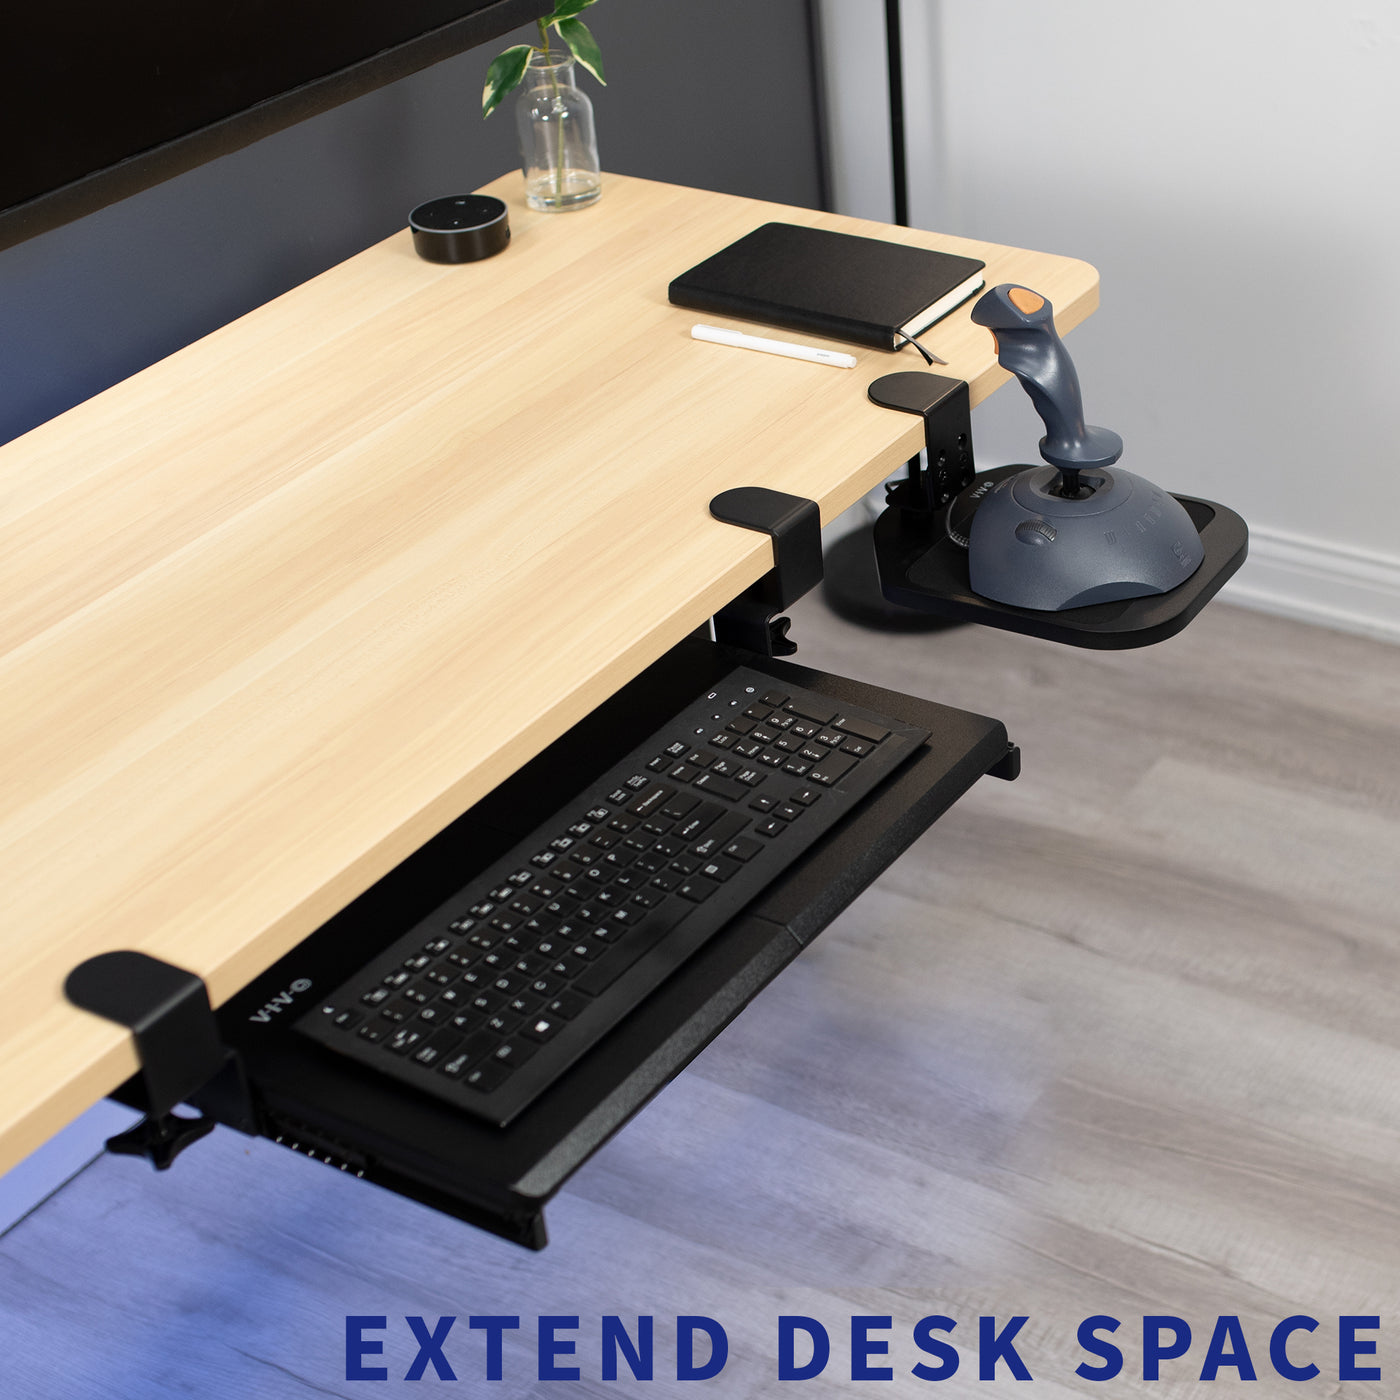 Under desk keyboard tray with an additional mouse tray holding a remote controller.